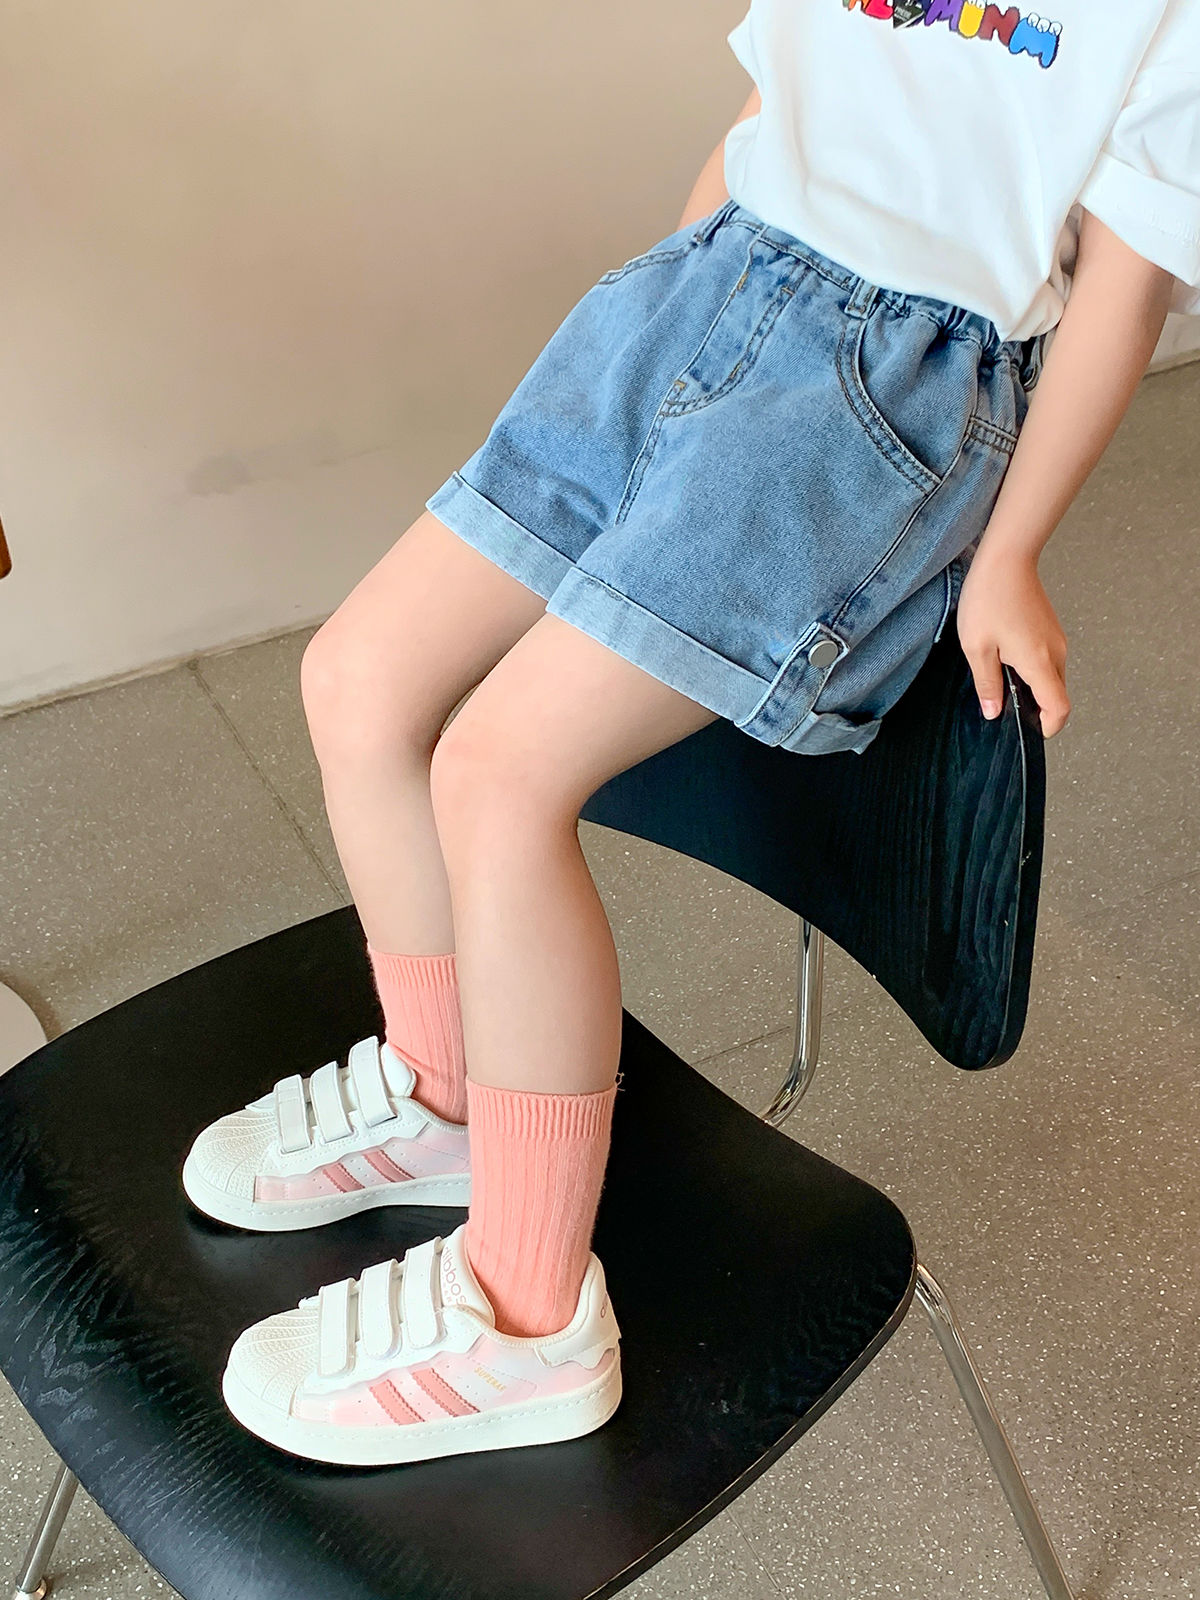 Girls shorts 2023 summer new children's refreshing casual jeans baby fashion all-match five-point pants trend